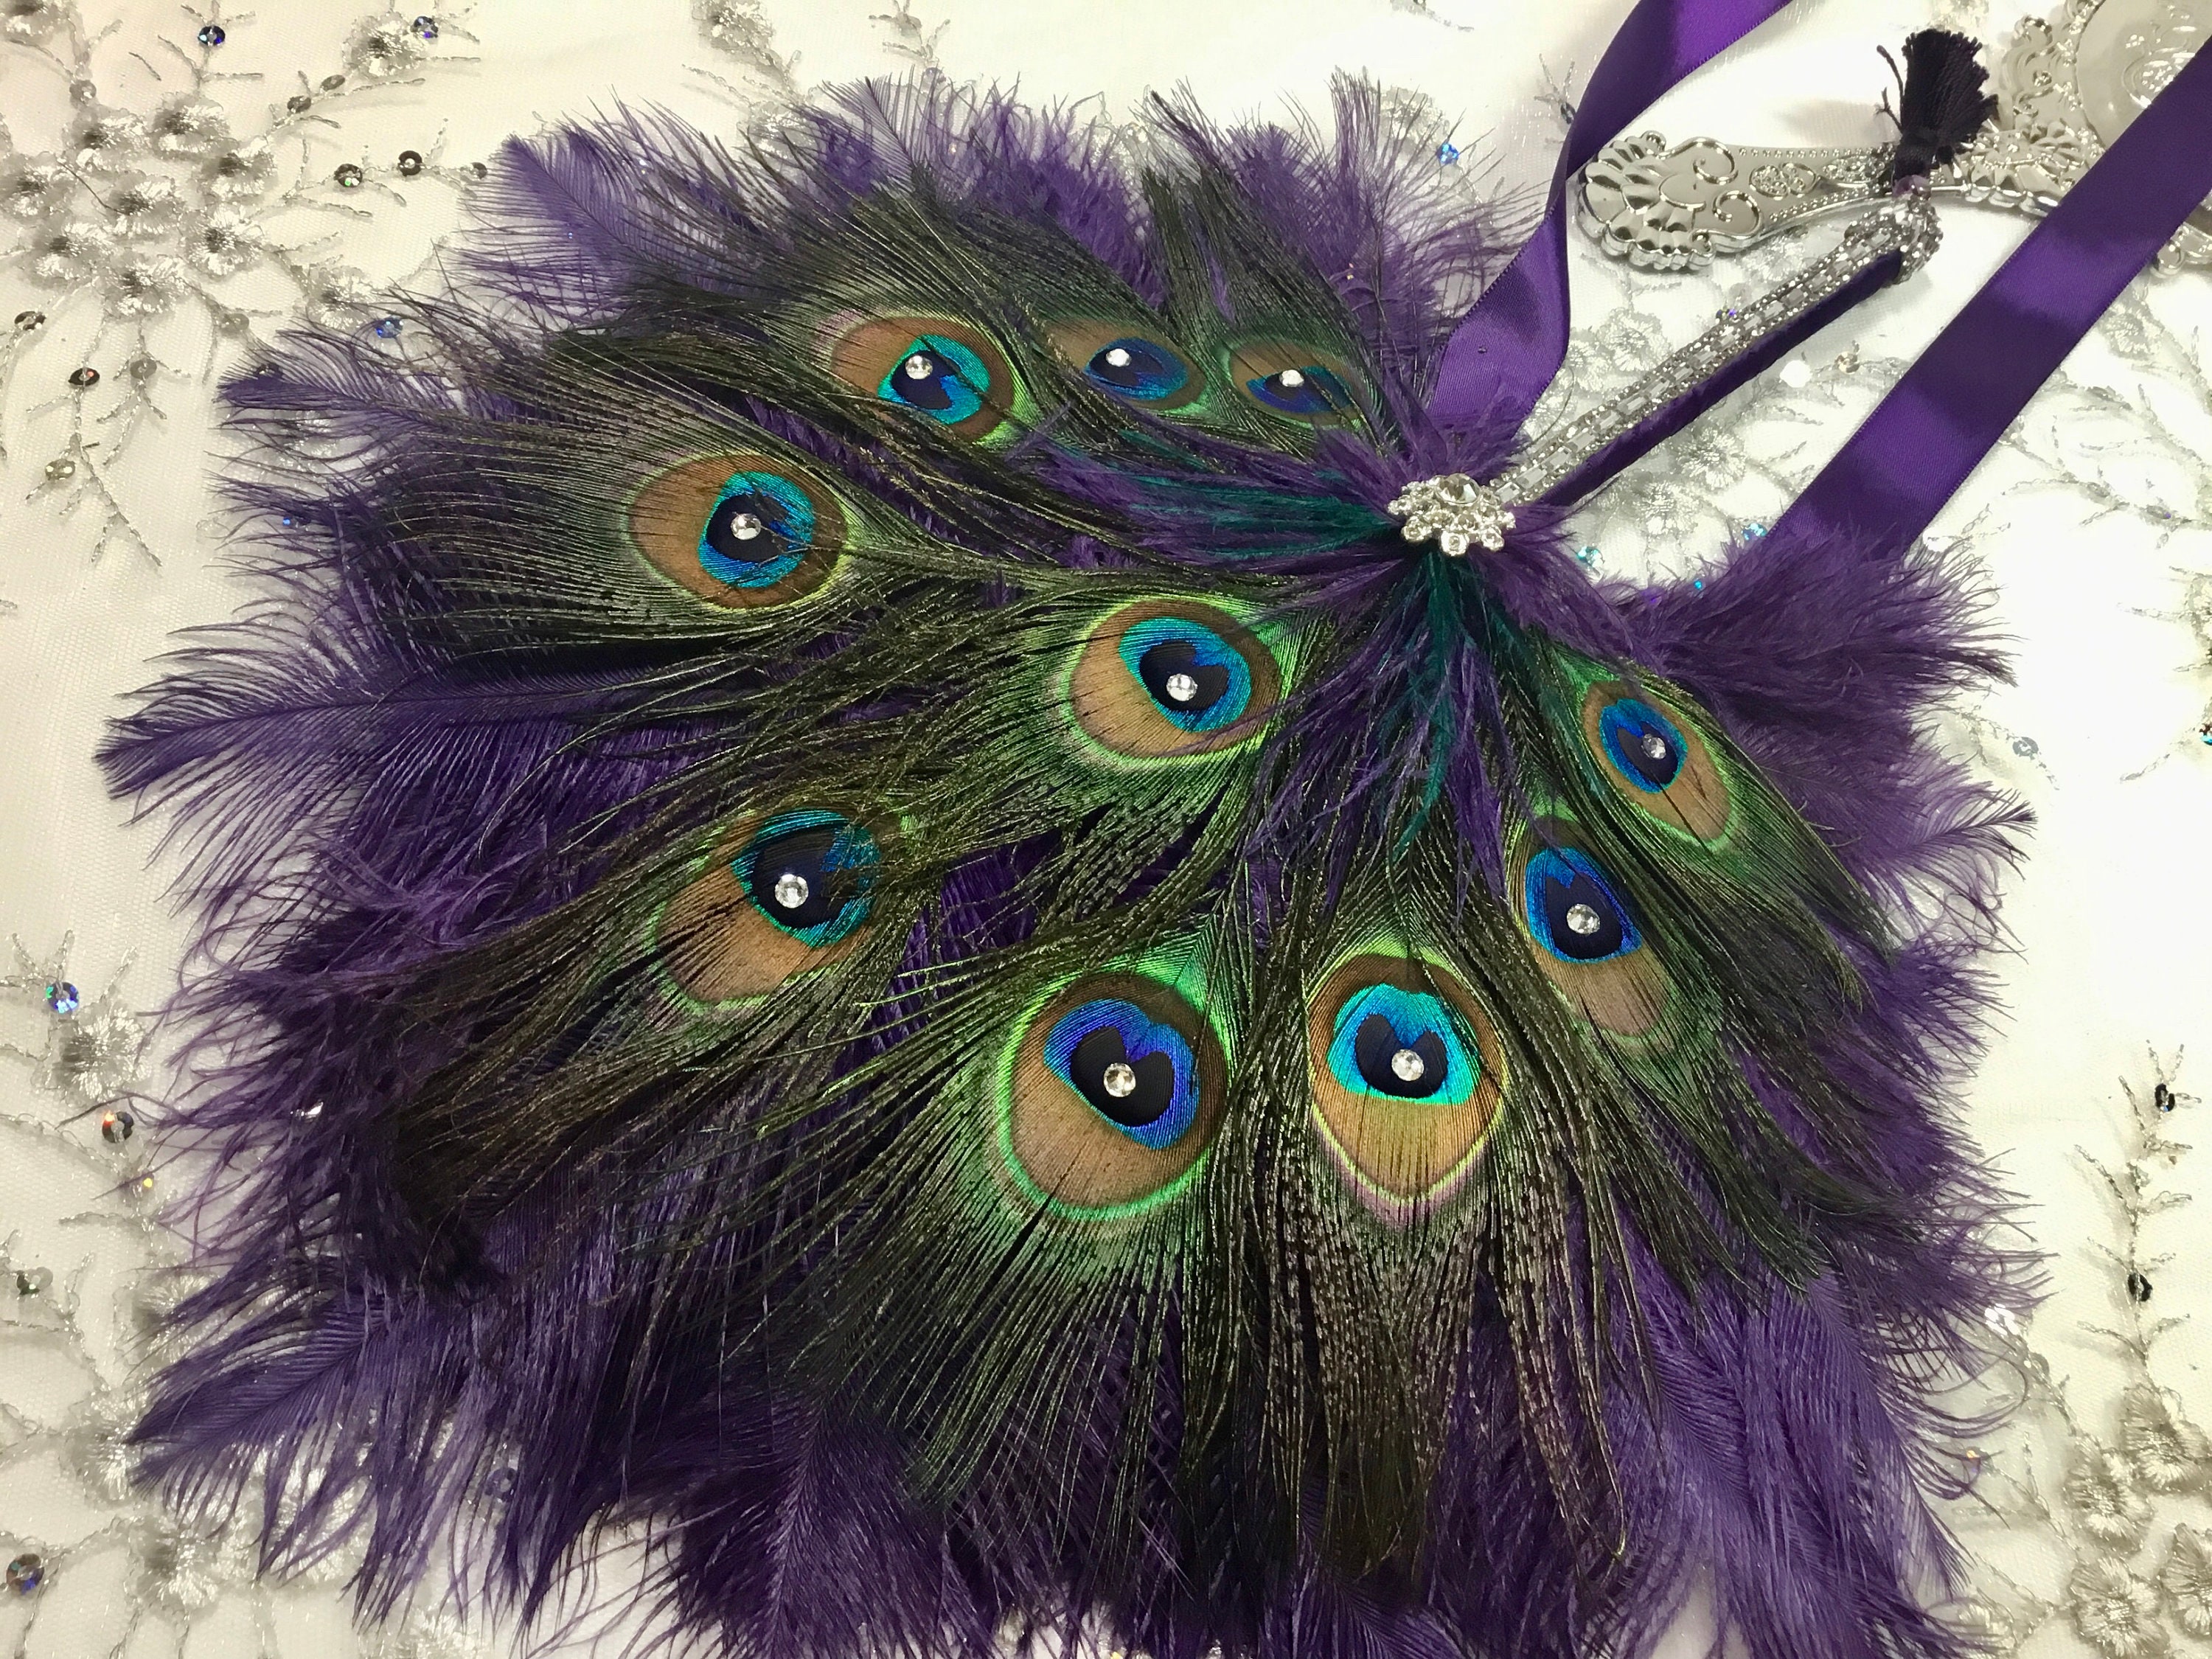 9-11 Inch Dark Purple Feathers. Lavender Peacock Sword Quills for Weaving  Into Hair. Long Monochromatic Tail Plumes for Halloween Costumes 